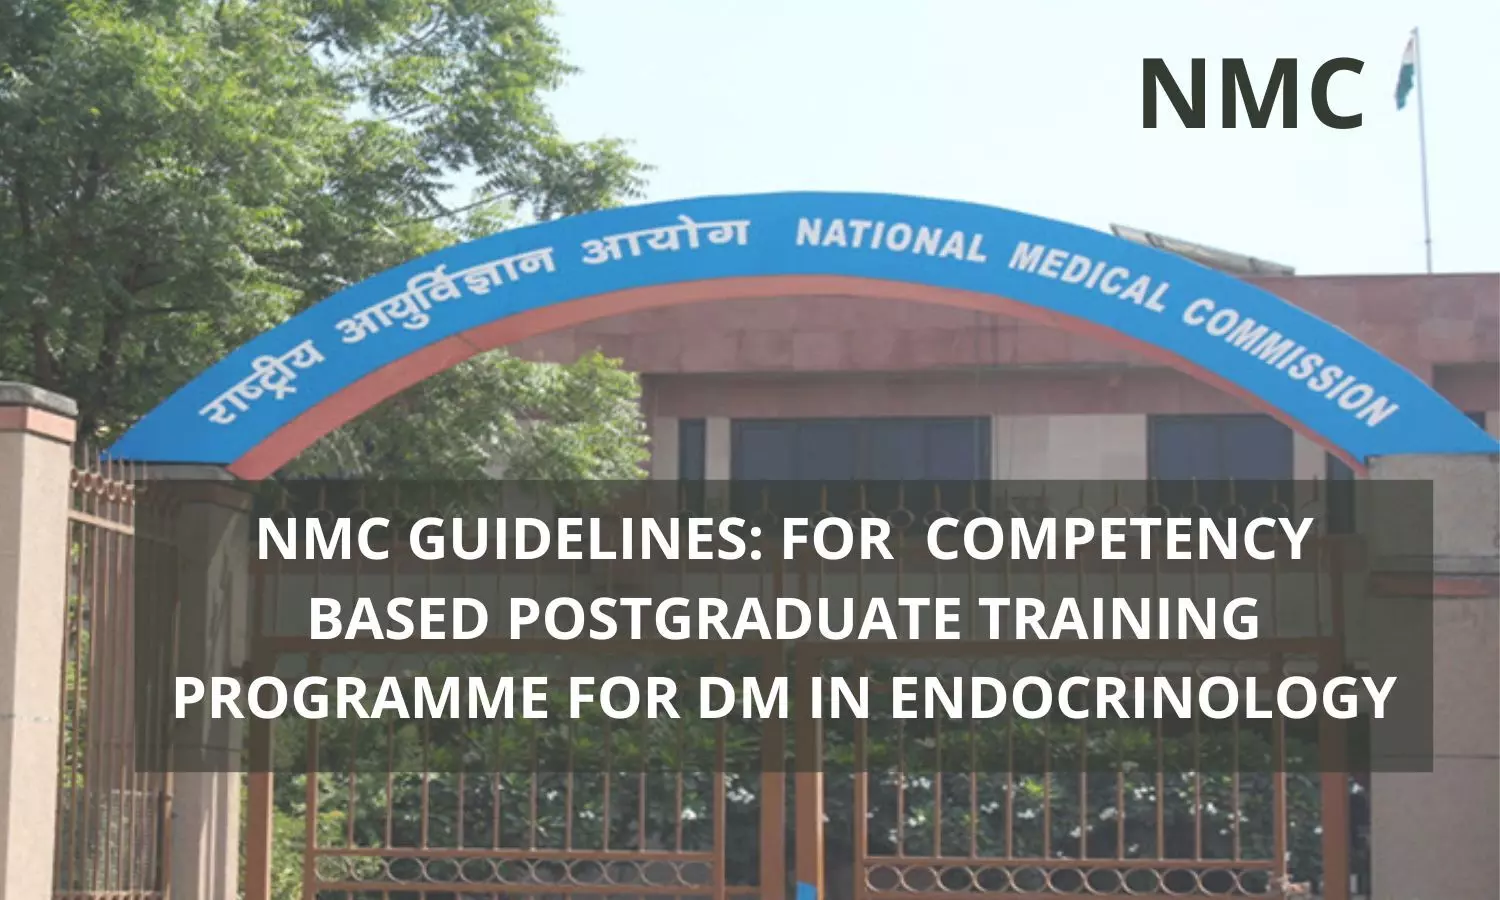 NMC Guidelines For Competency-Based Training Programme For DM Endocrinology